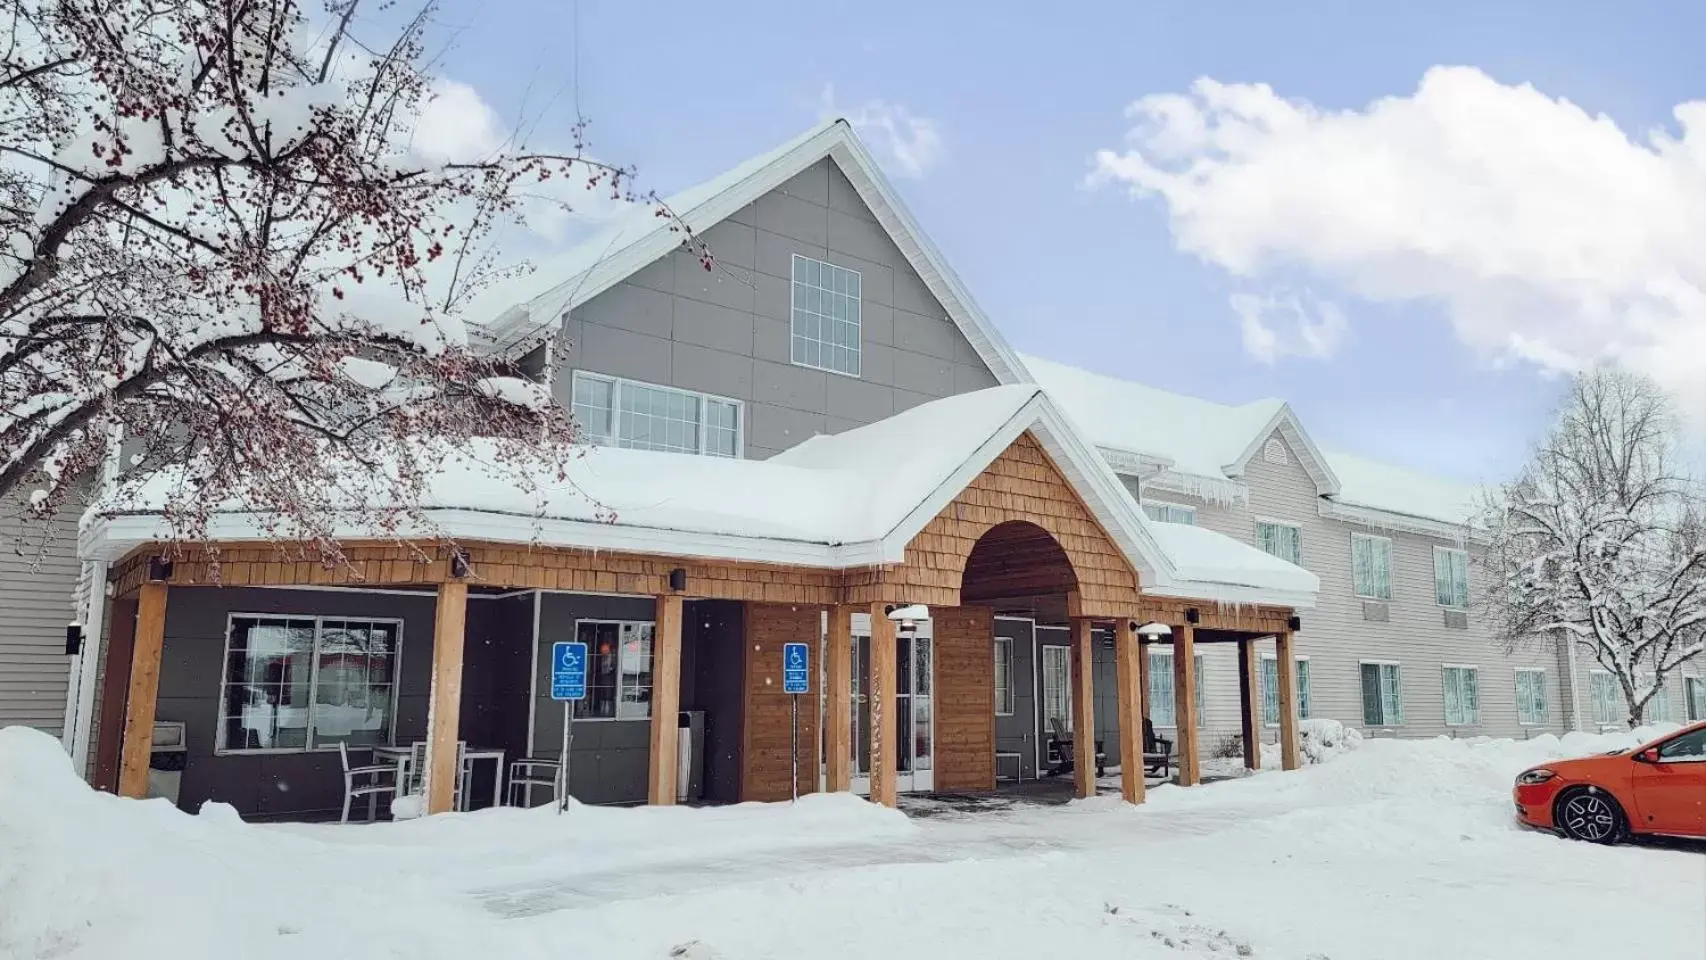 Property building, Winter in Country Inn & Suites by Radisson, Detroit Lakes, MN